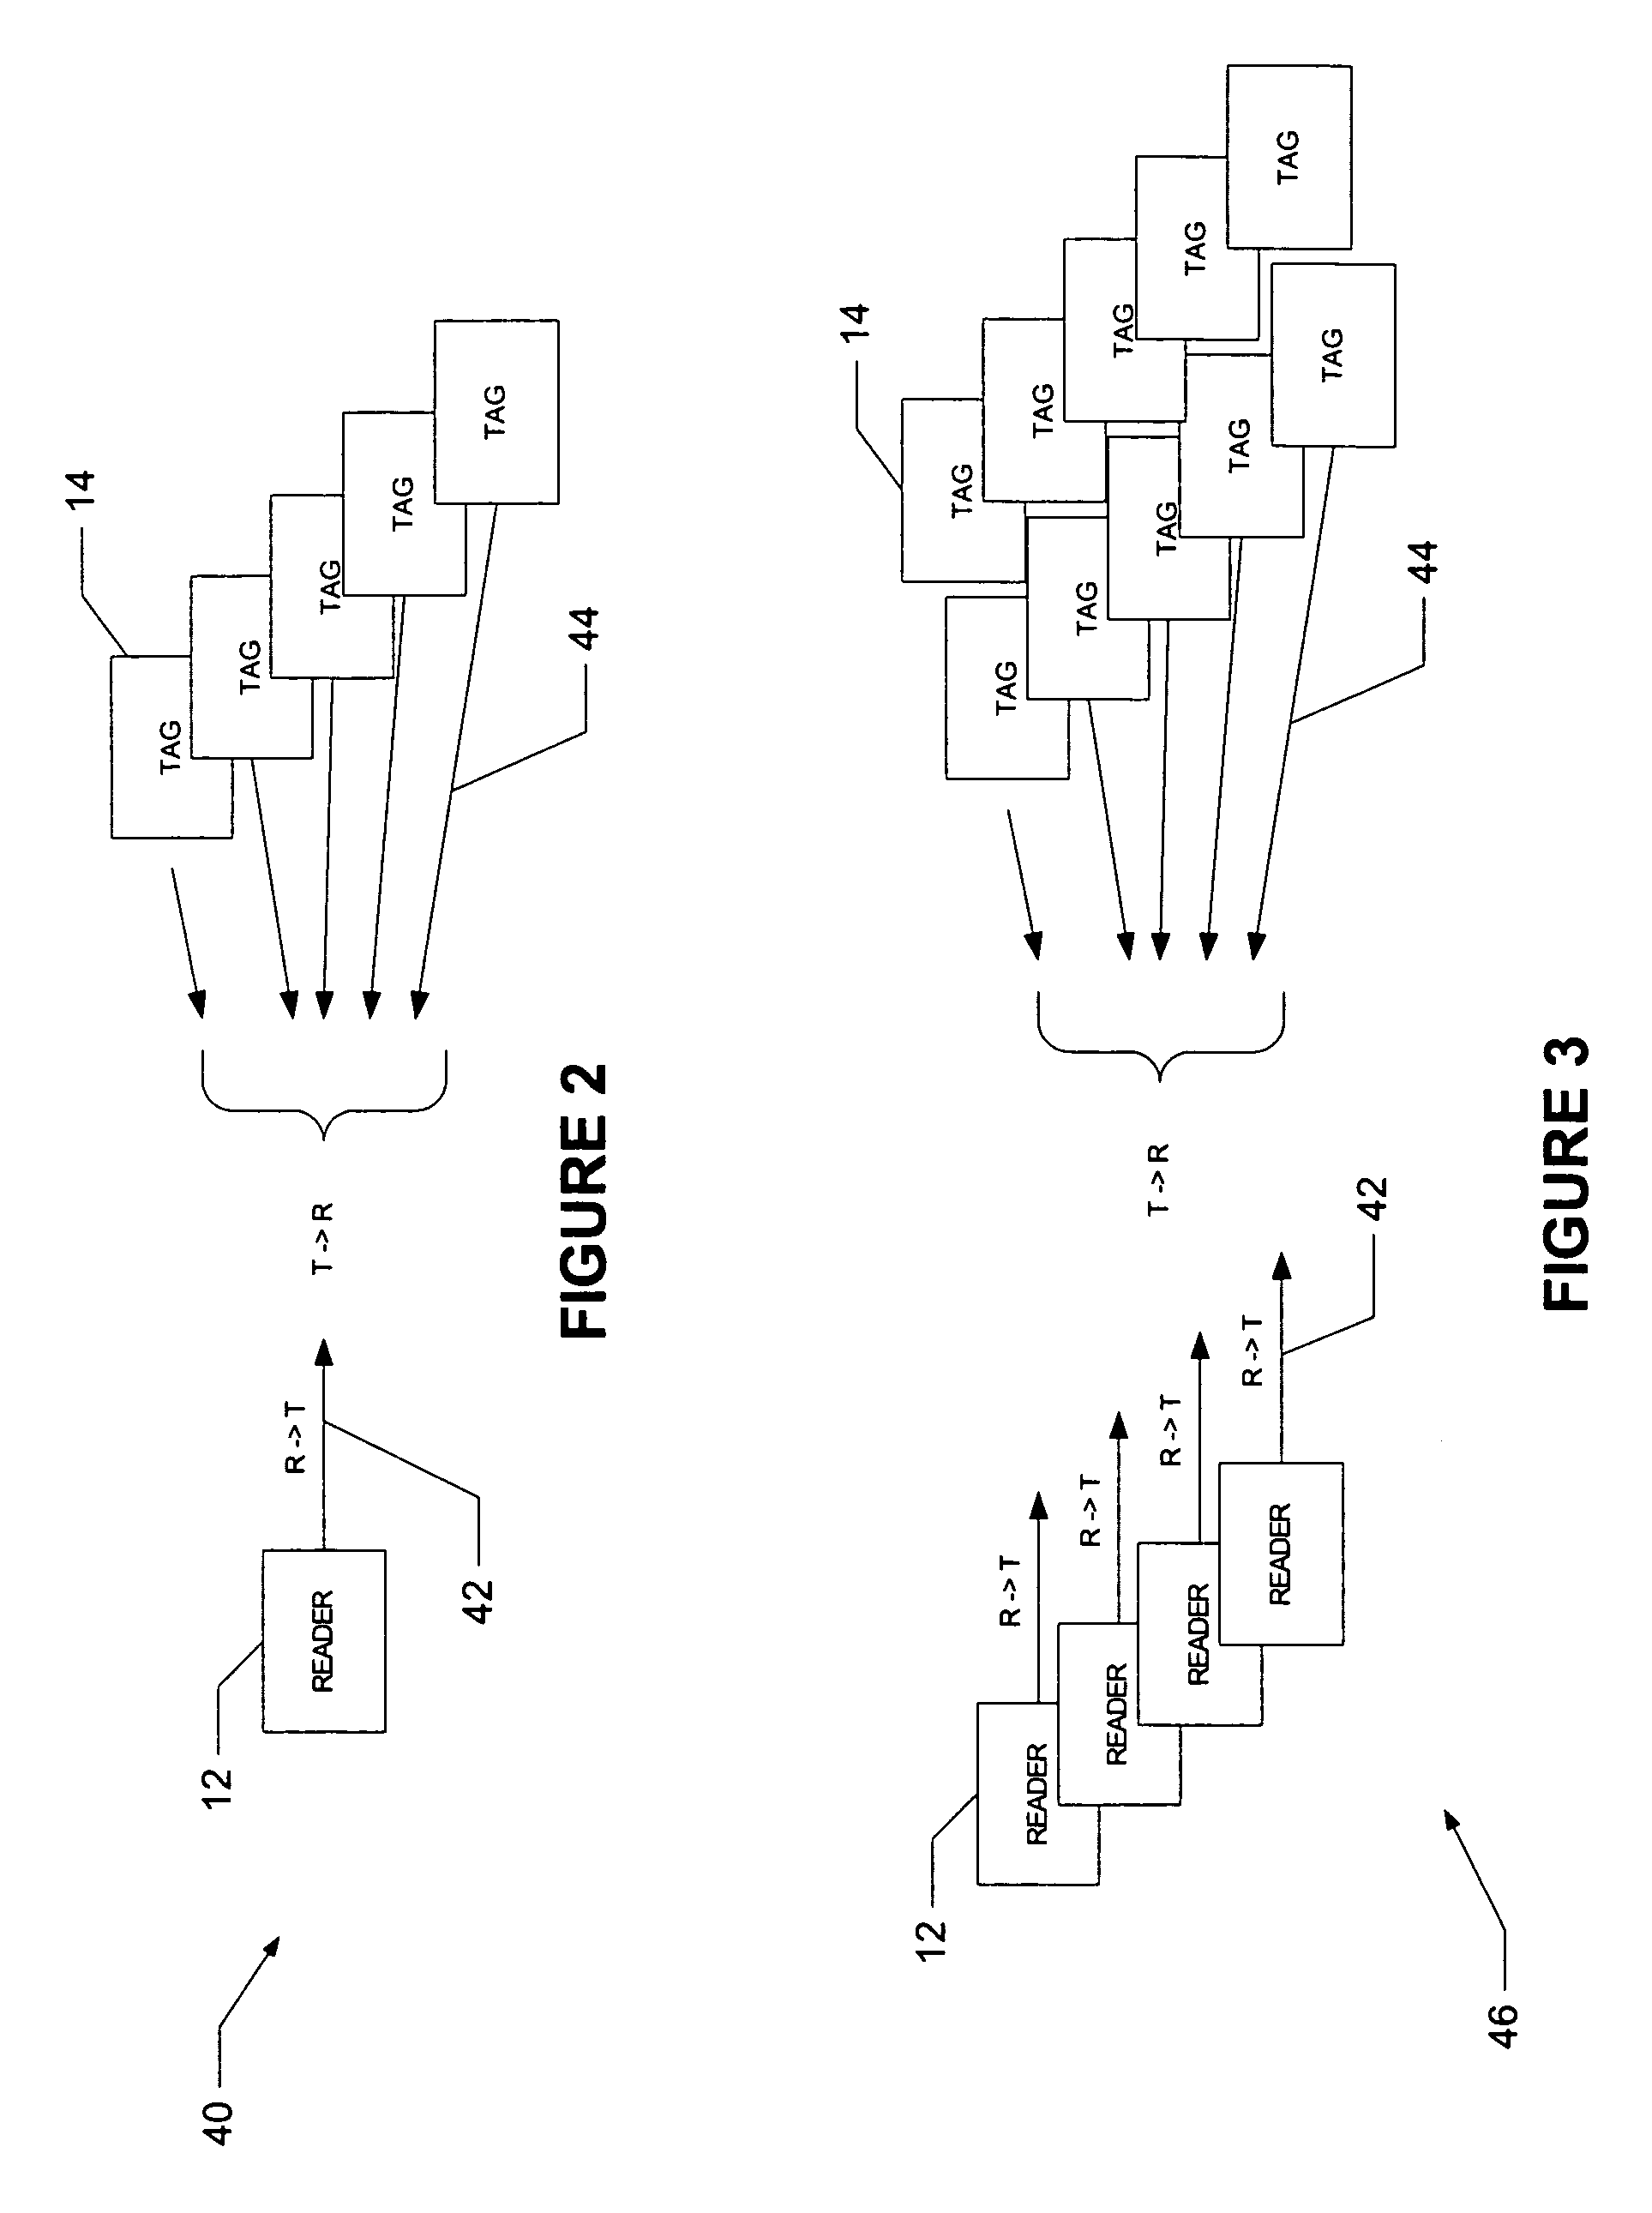 Method and apparatus to configure an RFID system to be adaptable to a plurality of environmental conditions